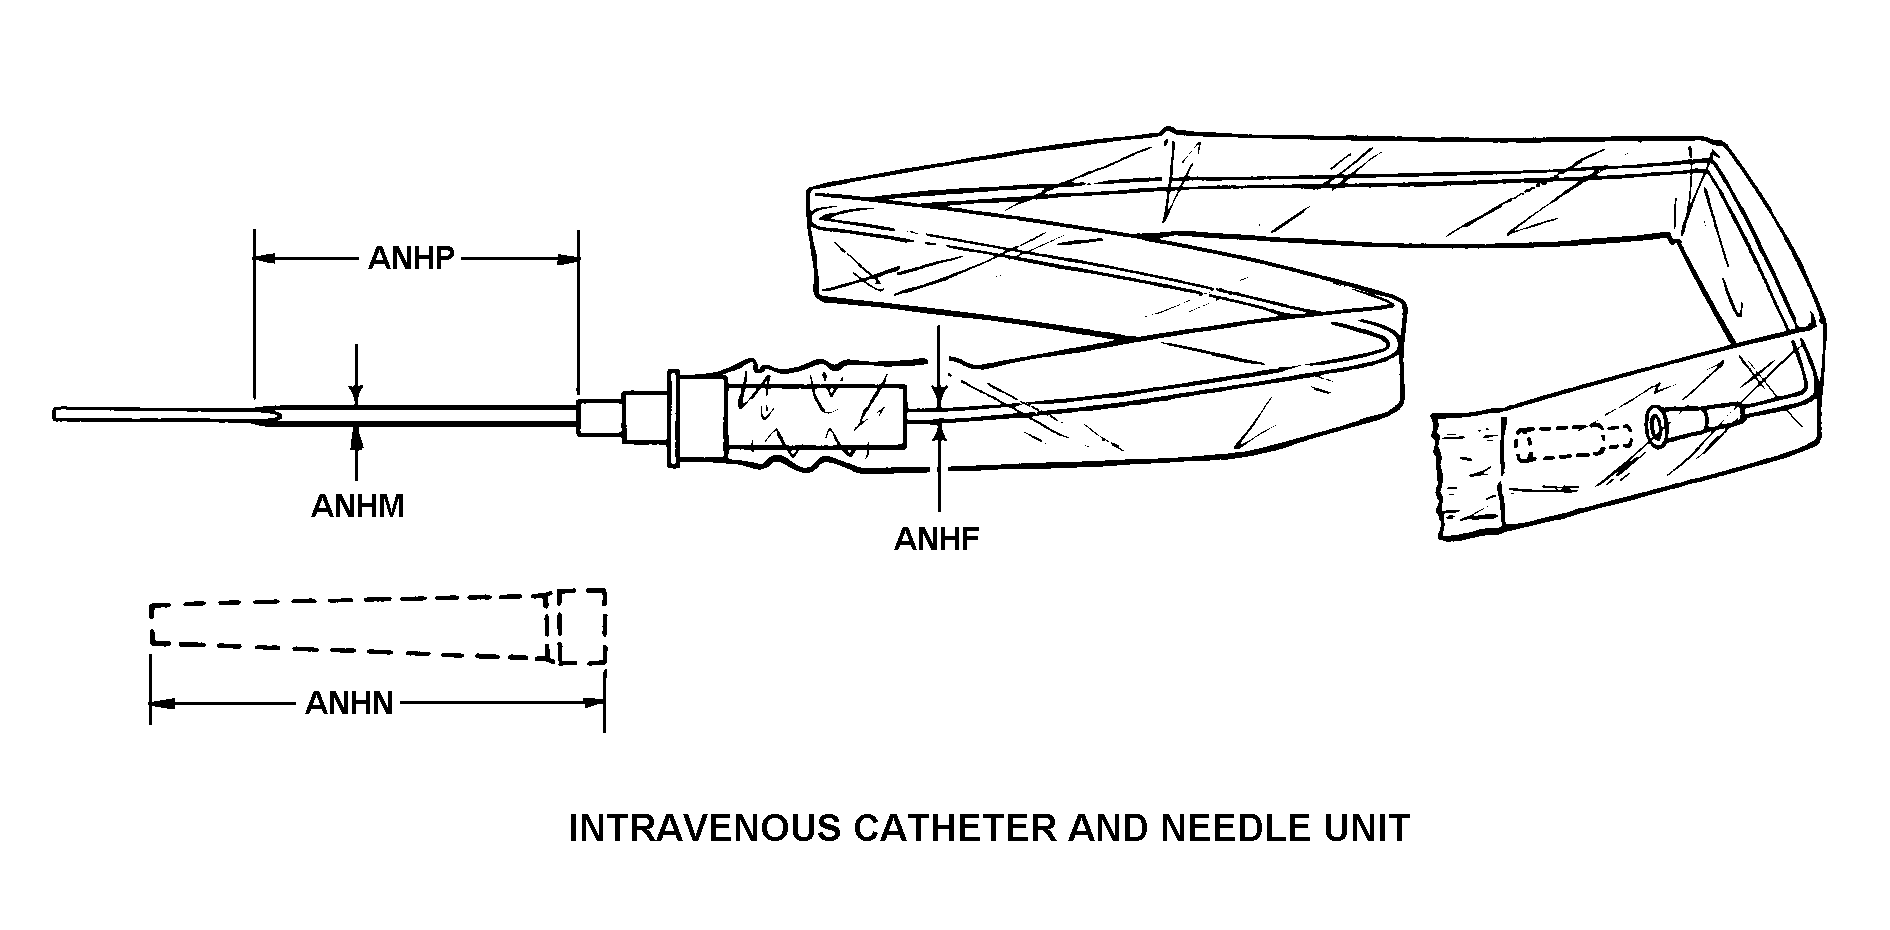 INTRAVENOUS CATHETER AND NEEDLE UNIT style nsn 6515-01-296-6901